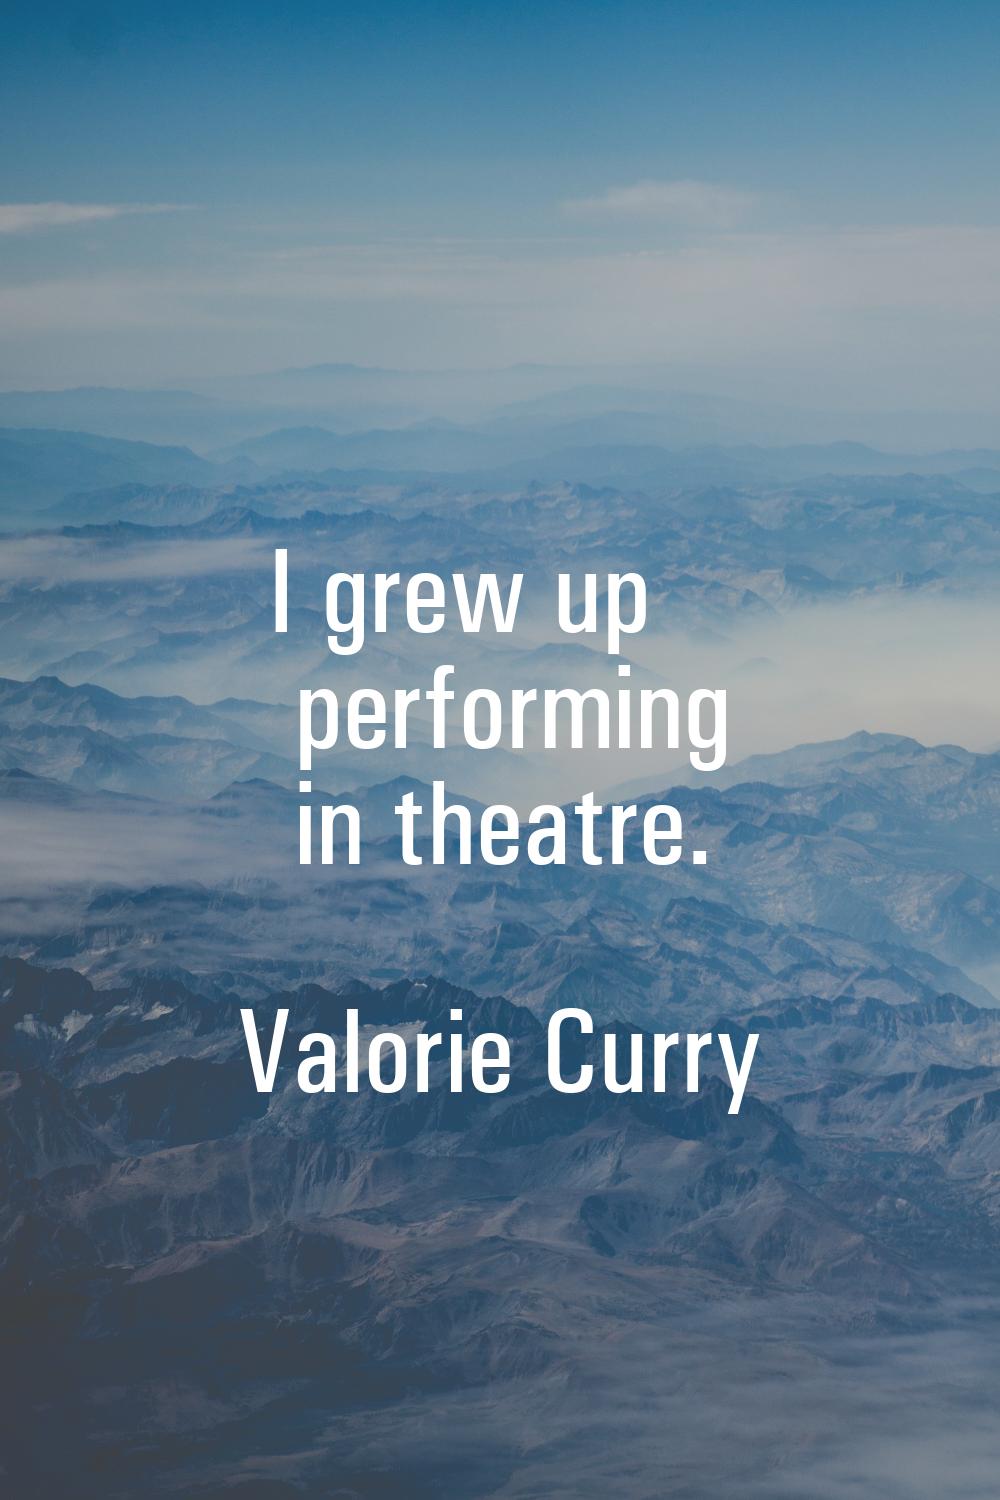 I grew up performing in theatre.